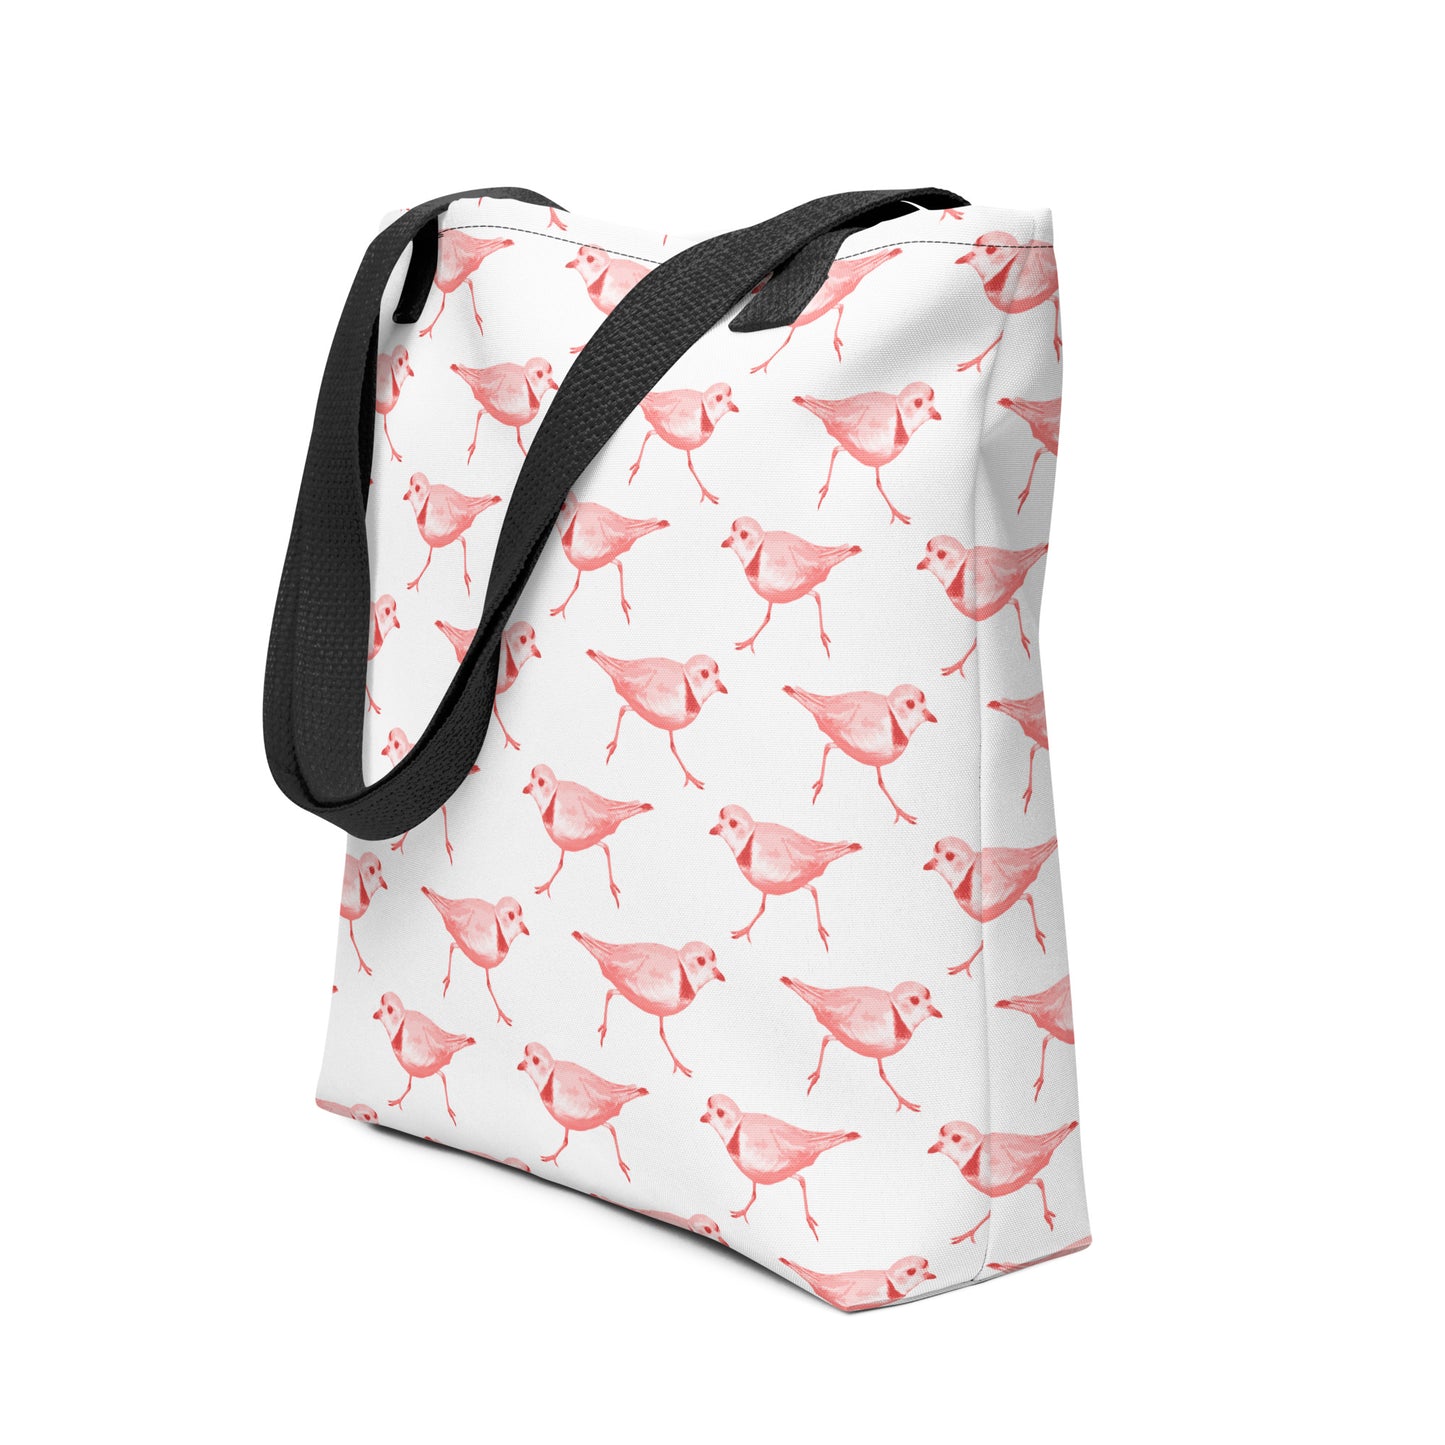 Piping Plover Tote Bag